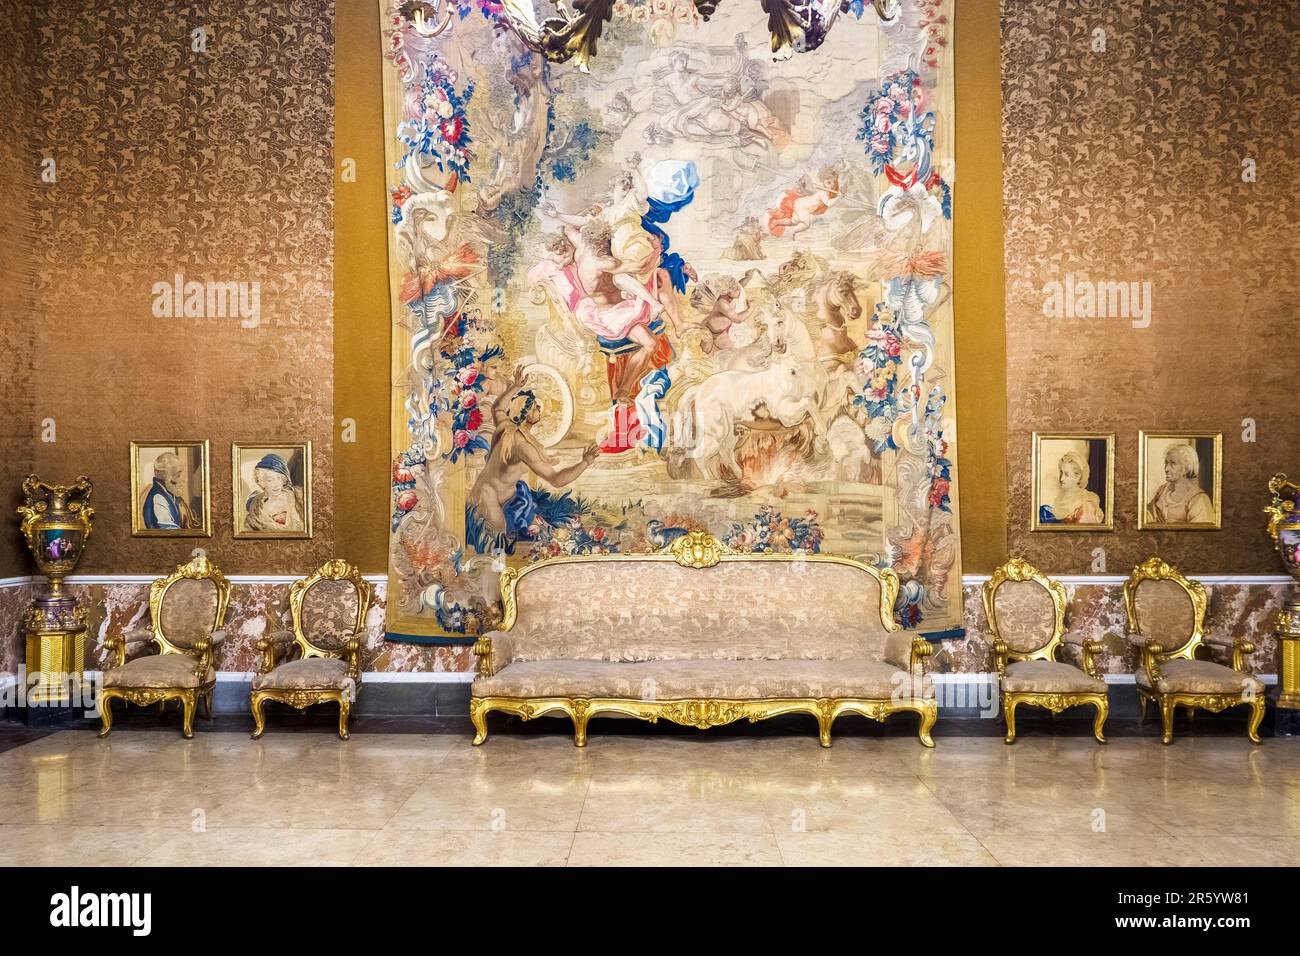 Neo-Rococo style furniture and the 18th century Neapolitan-manufactured tapestries in the third Antechamber in the Royal Palace of Naples that In 1734 became the royal residence of the Bourbons - Naples, Italy Stock Photo